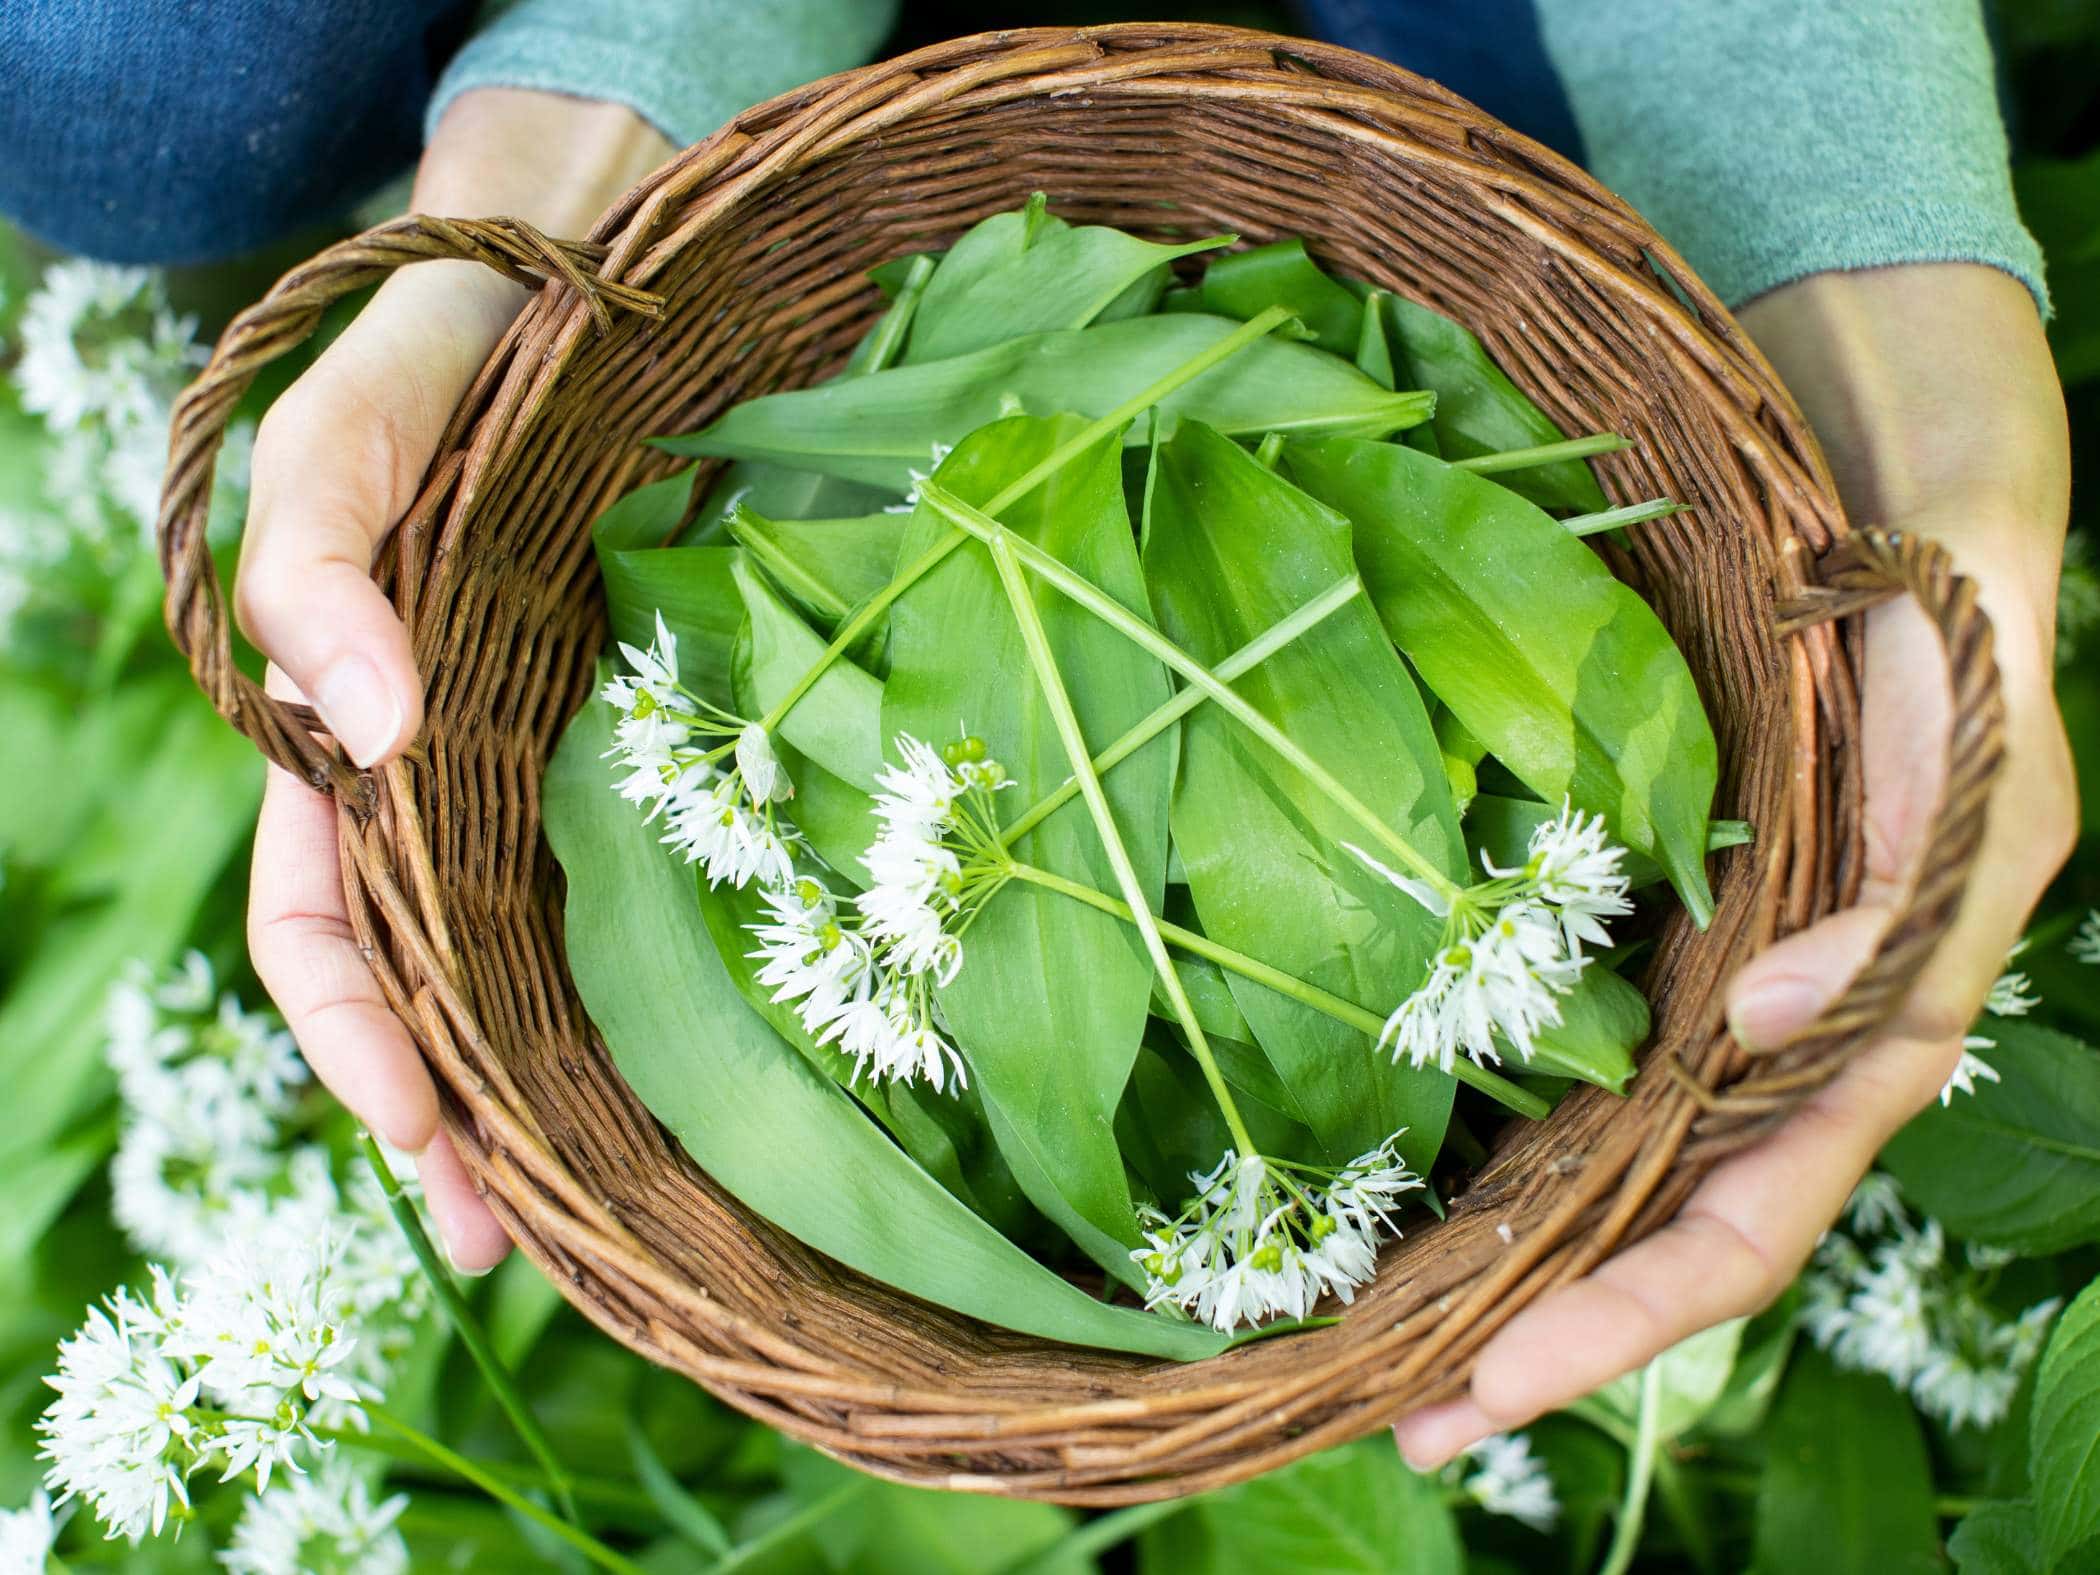 A person holds a wicker basket filled with green leaves and white flowers.